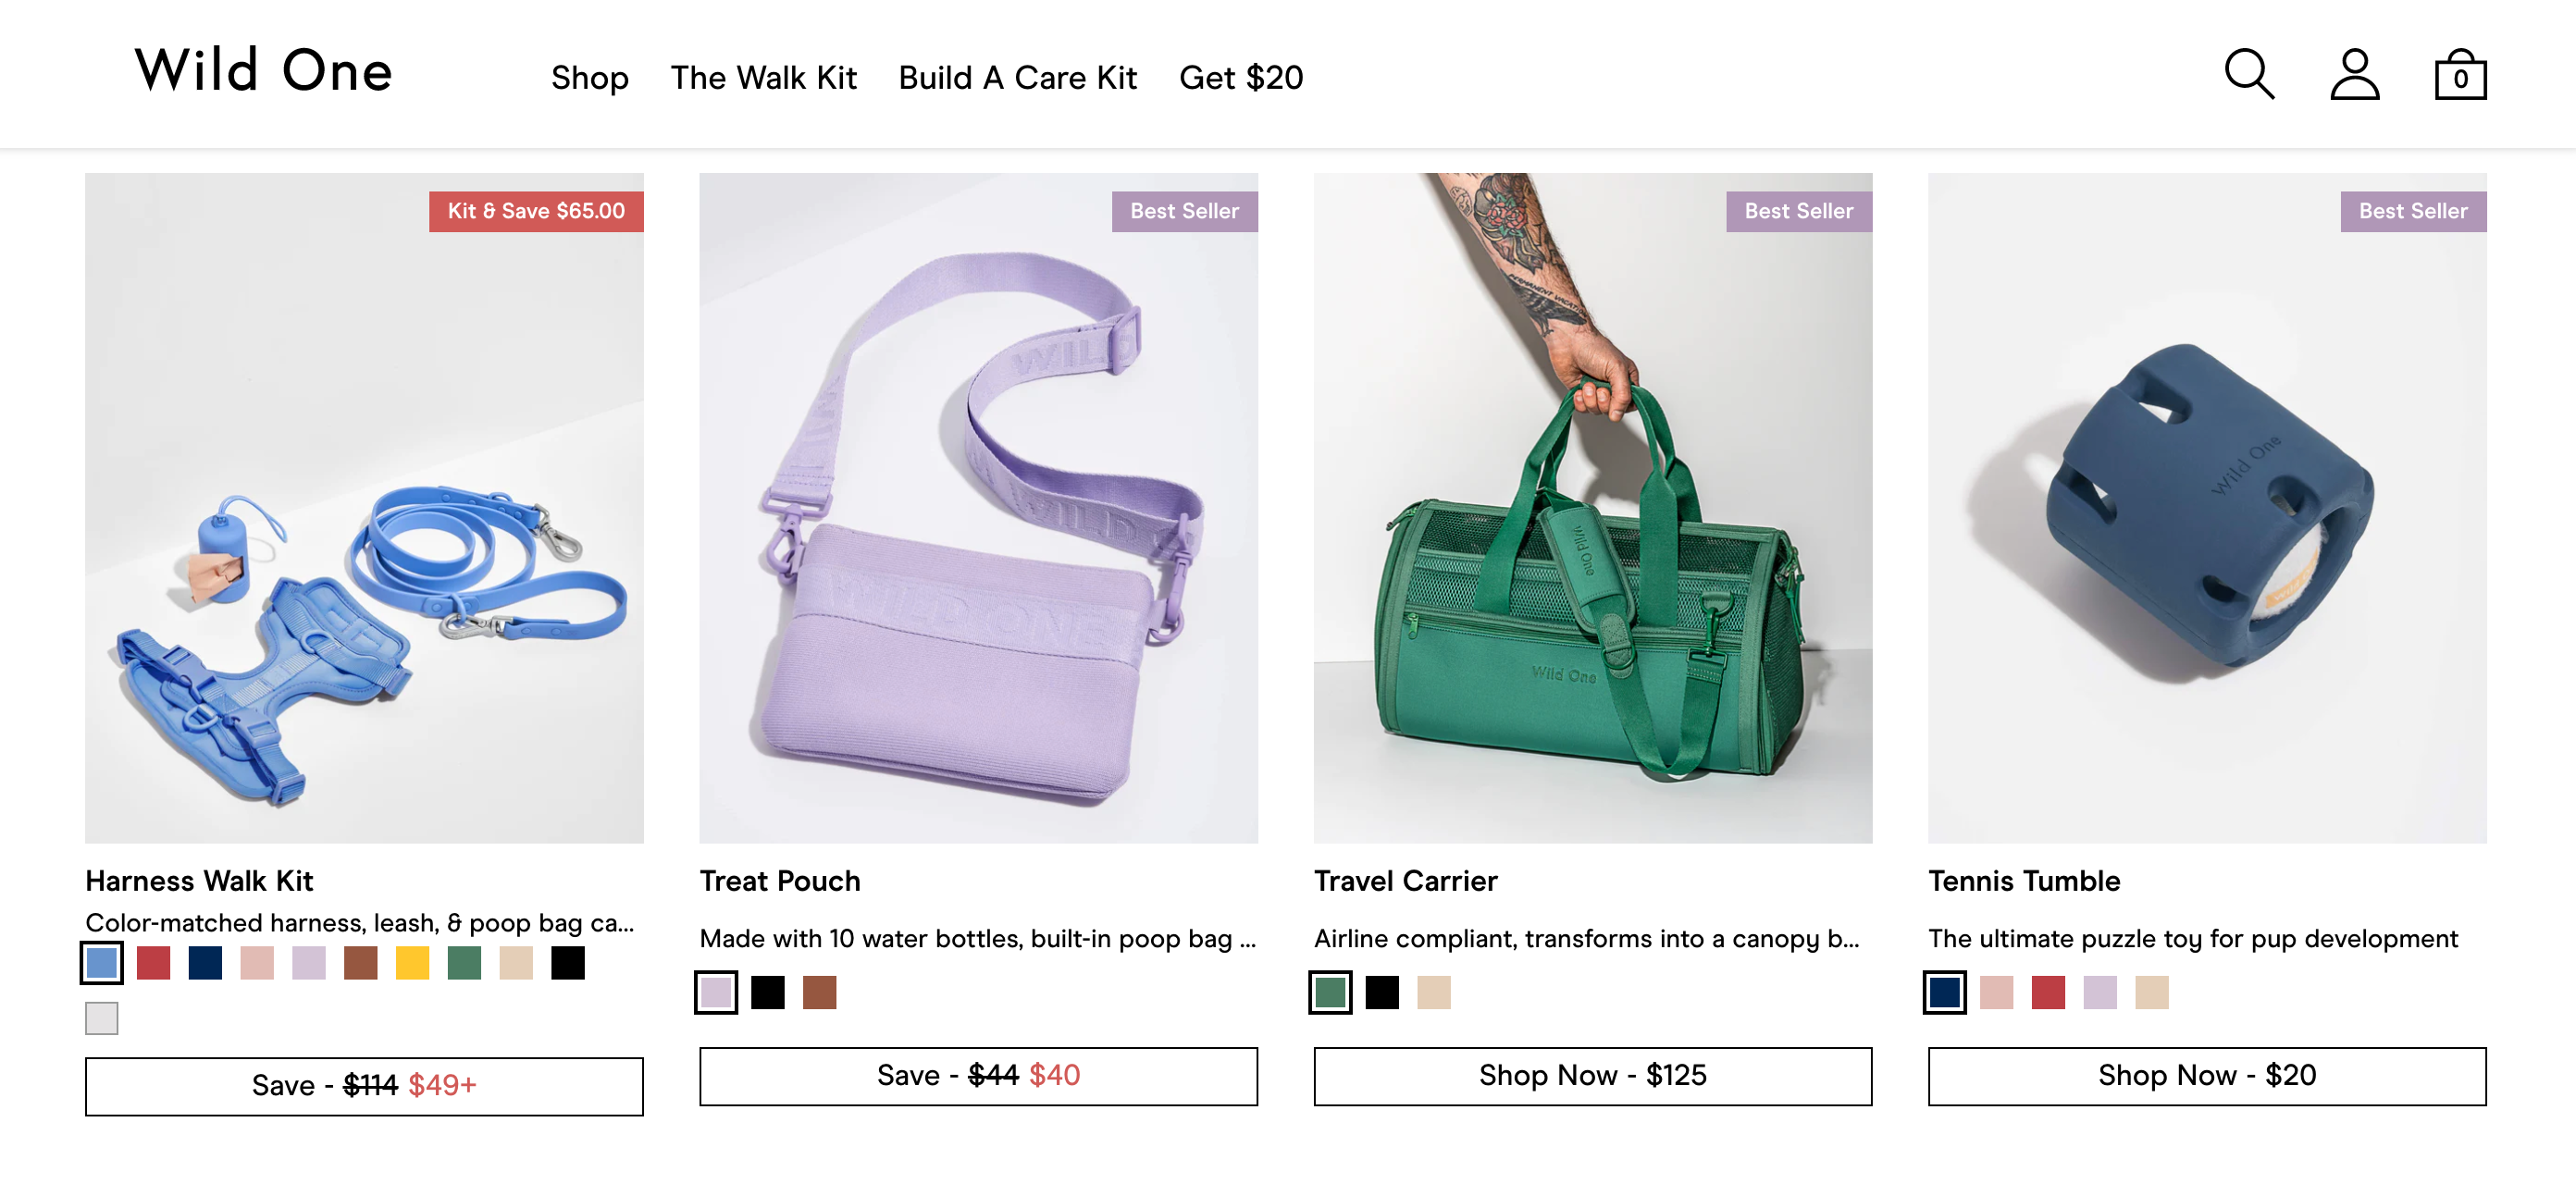 Screengrab of a collection of pet products on the website homepage by Wild One